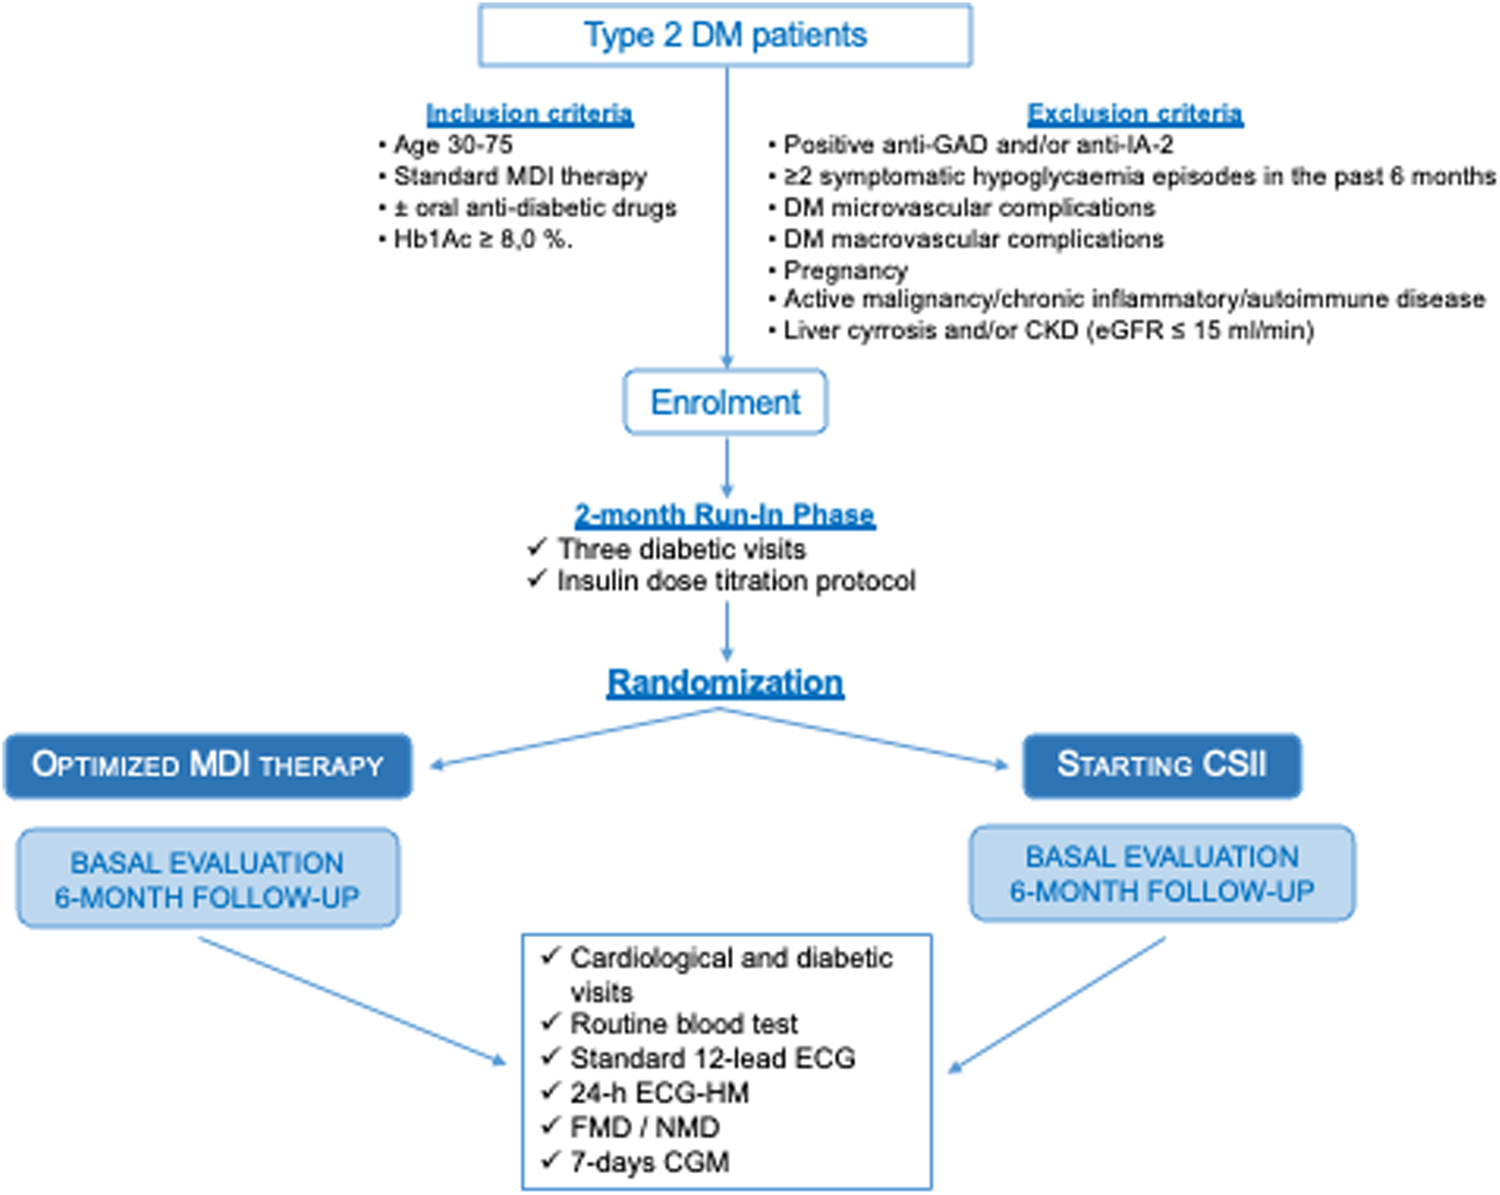 Insulin pump treatment vs. multiple daily insulin injections in patients with poorly controlled Type 2 diabetes mellitus: a comparison of cardiovascular effects